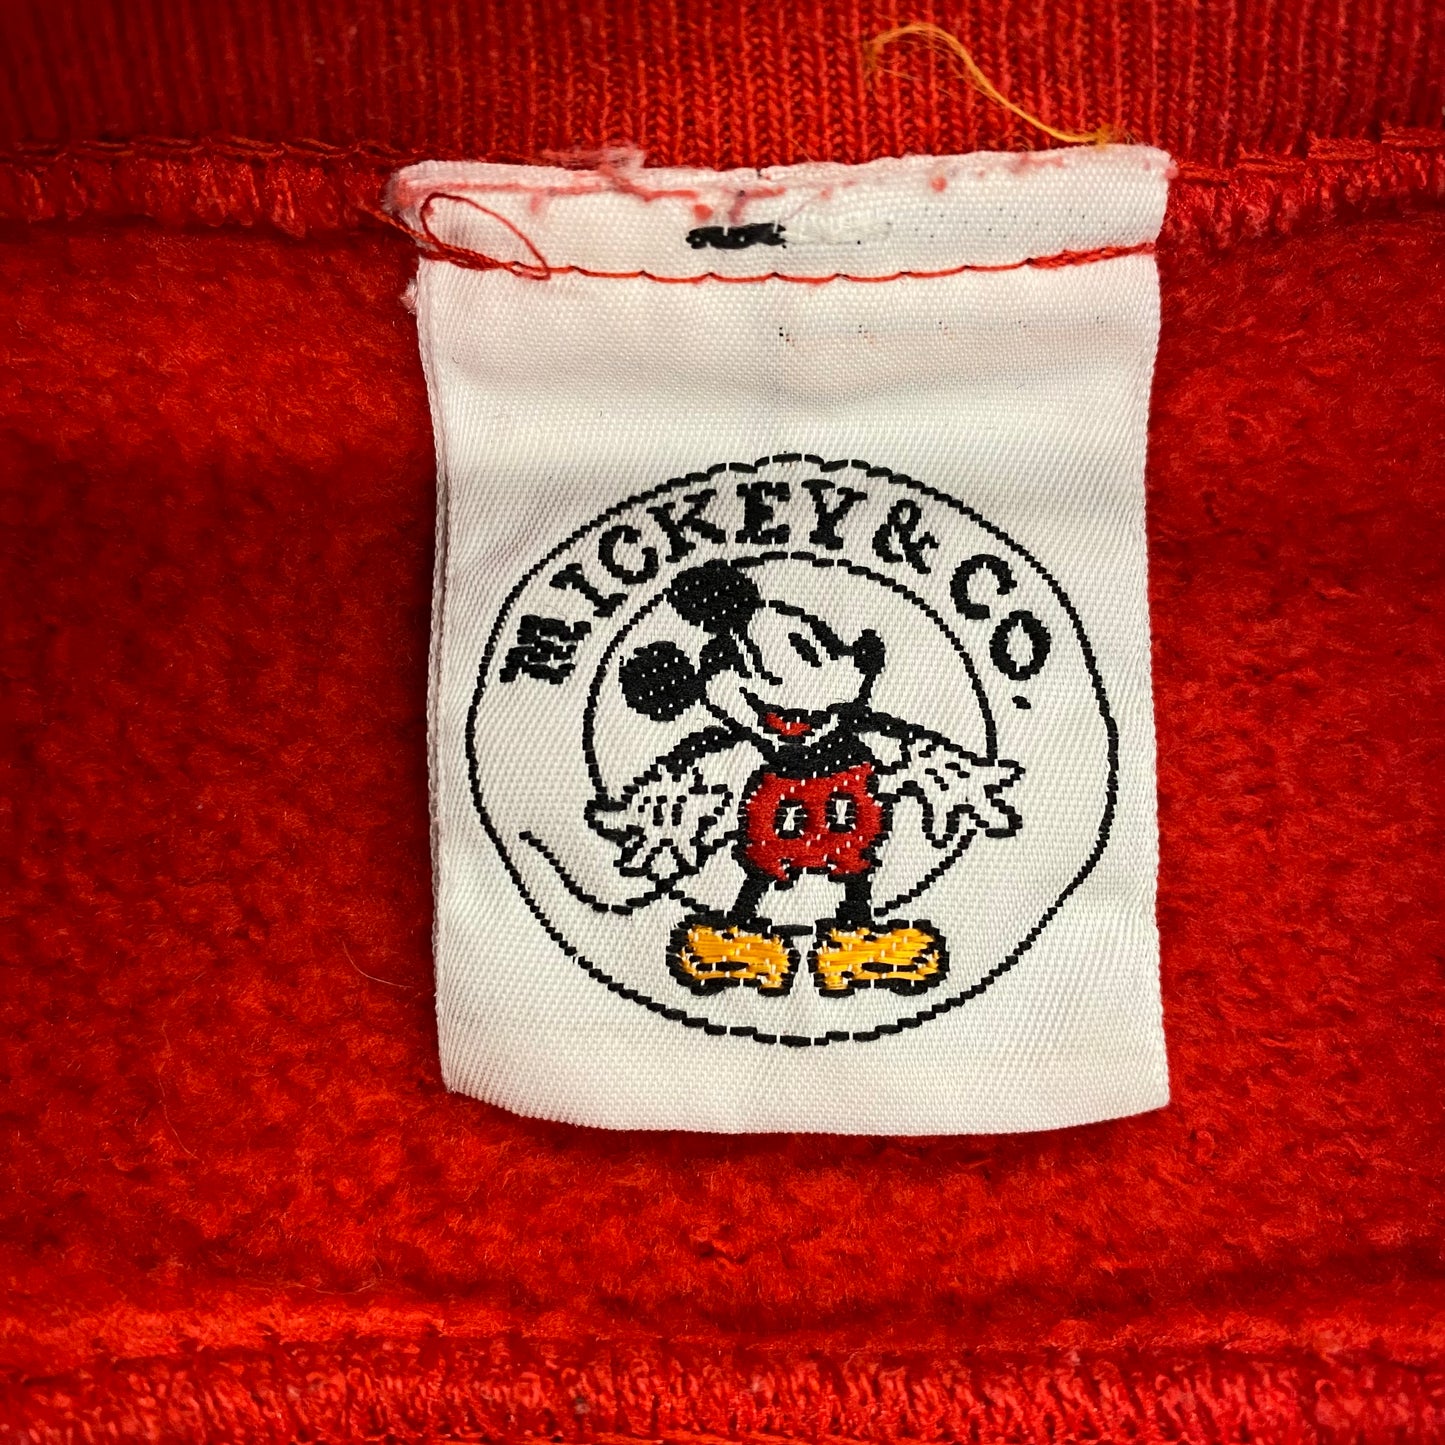 Vintage 1990s Disney Mickey Mouse Red Crewneck - Size Large